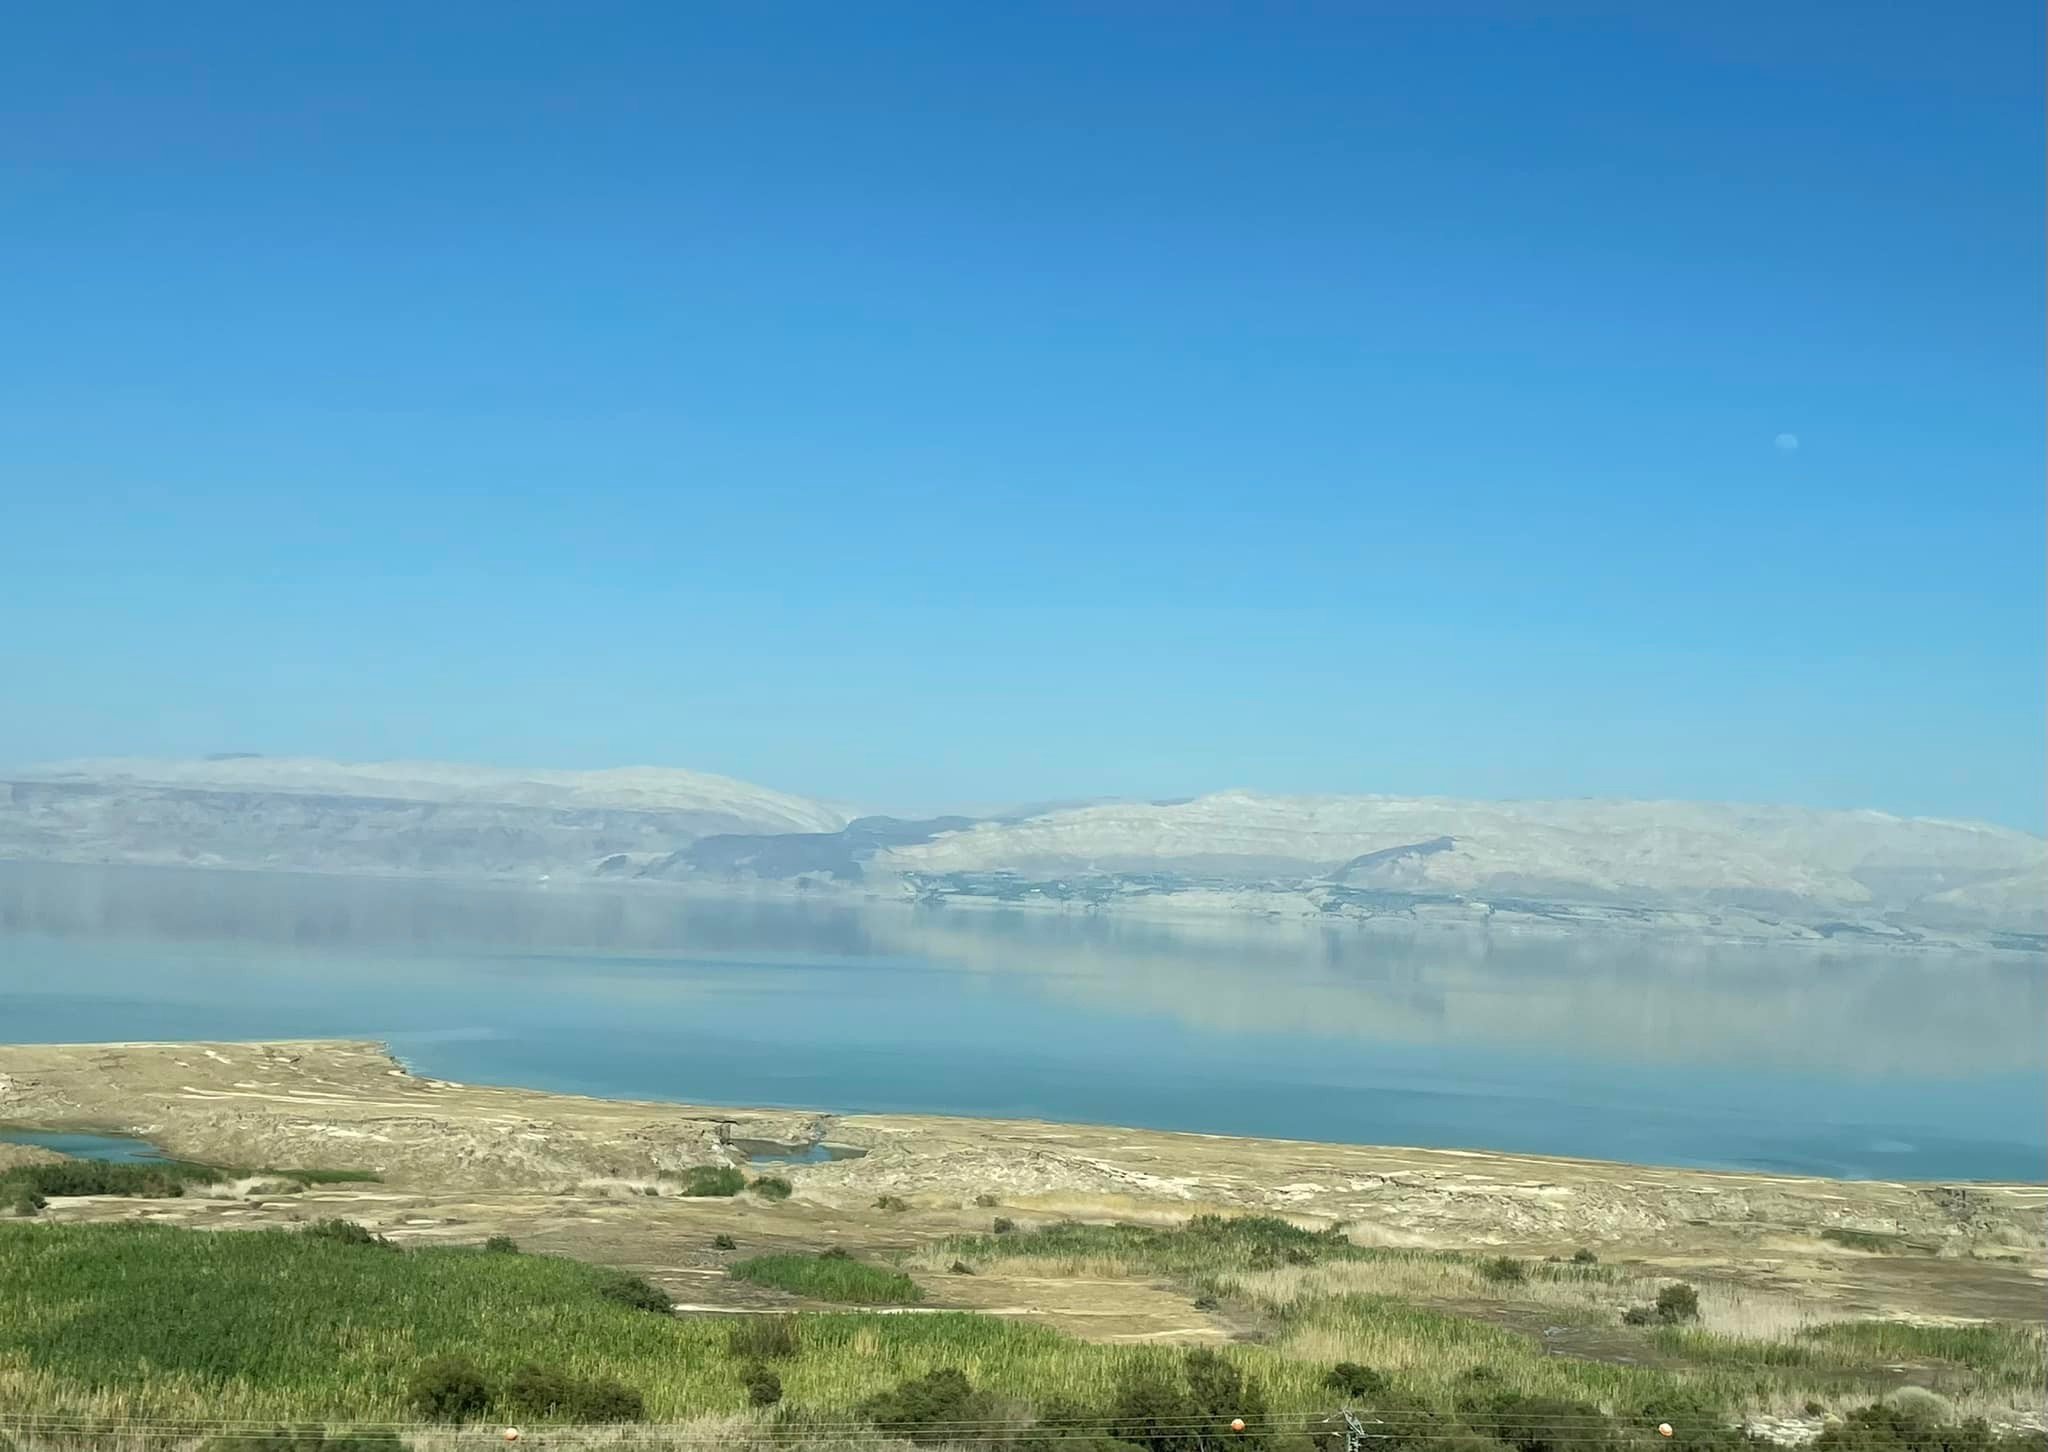  The Dead Sea. I took dozens of pictures. So surreally beautiful. 